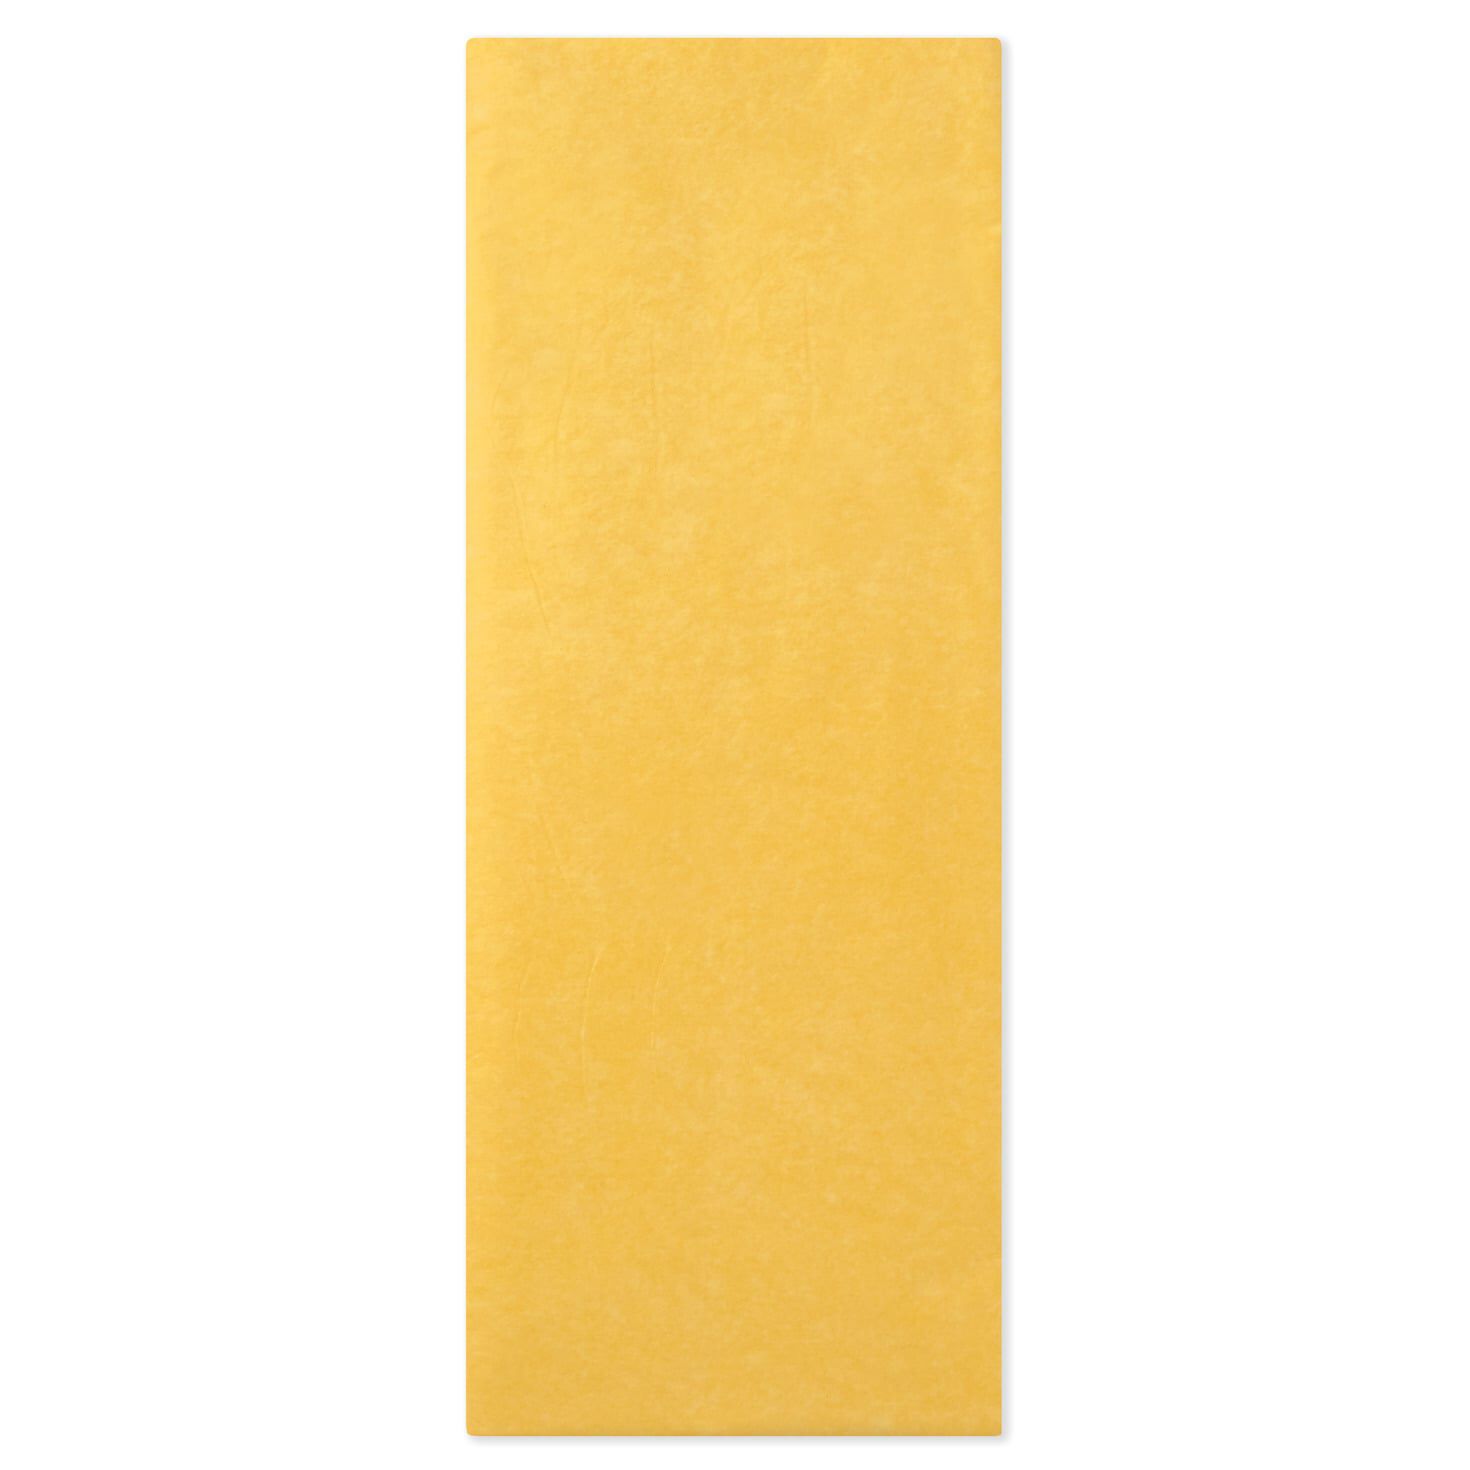 Details about   Lot of 2 Hallmark Wrap it UpTissue Yellow 8 sheets 19" x  2.17' 28.5 Total Sq Ft 